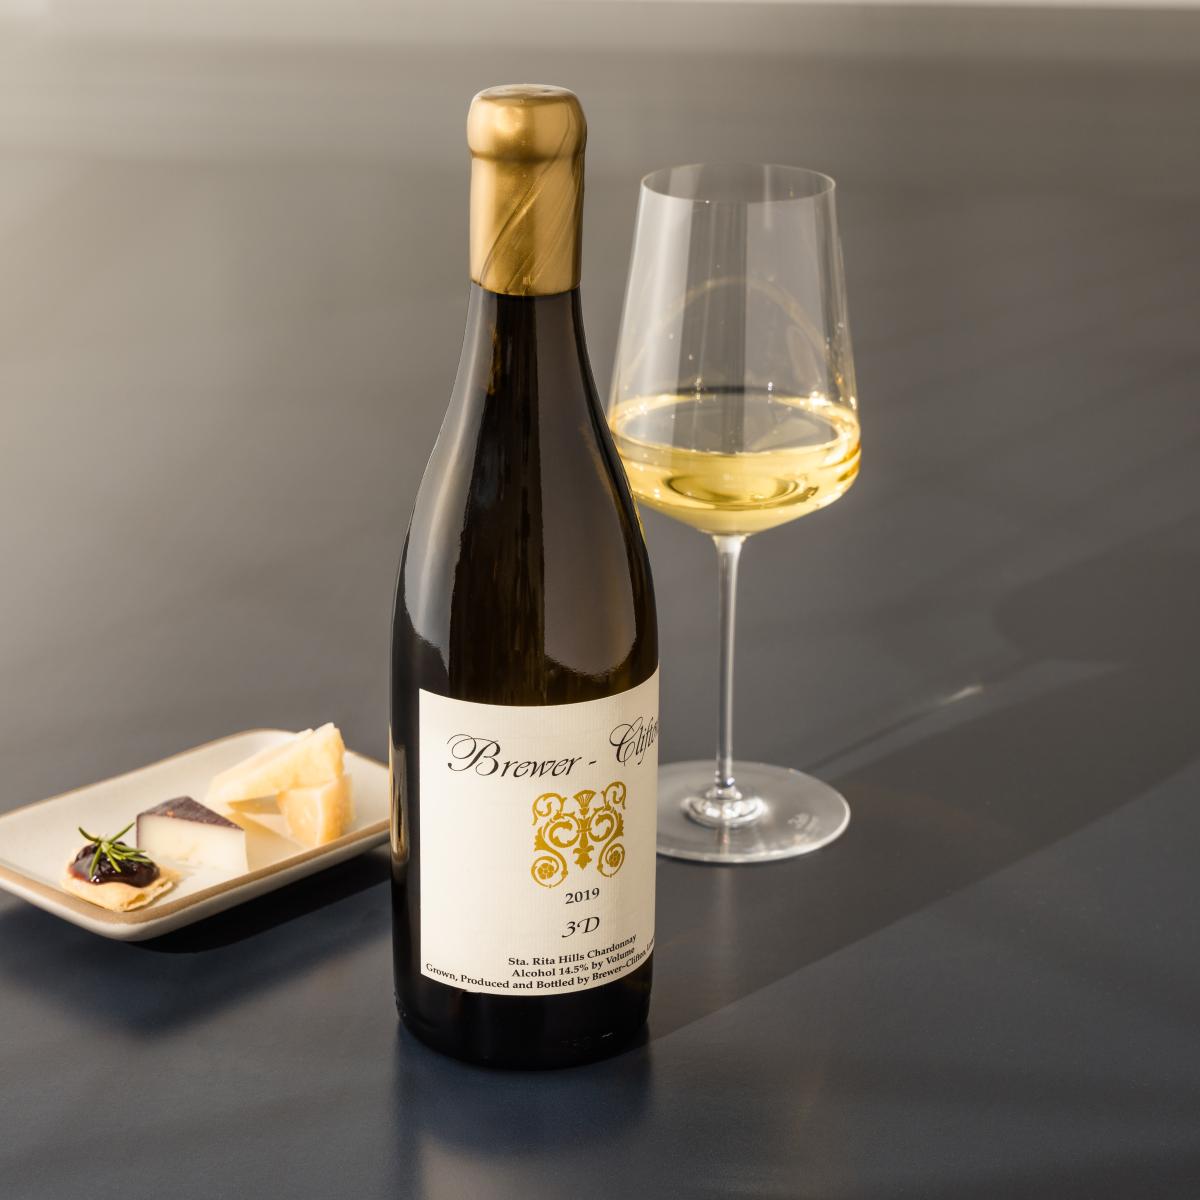 3D Chardonnay bottle shot with wine glass and cheese 